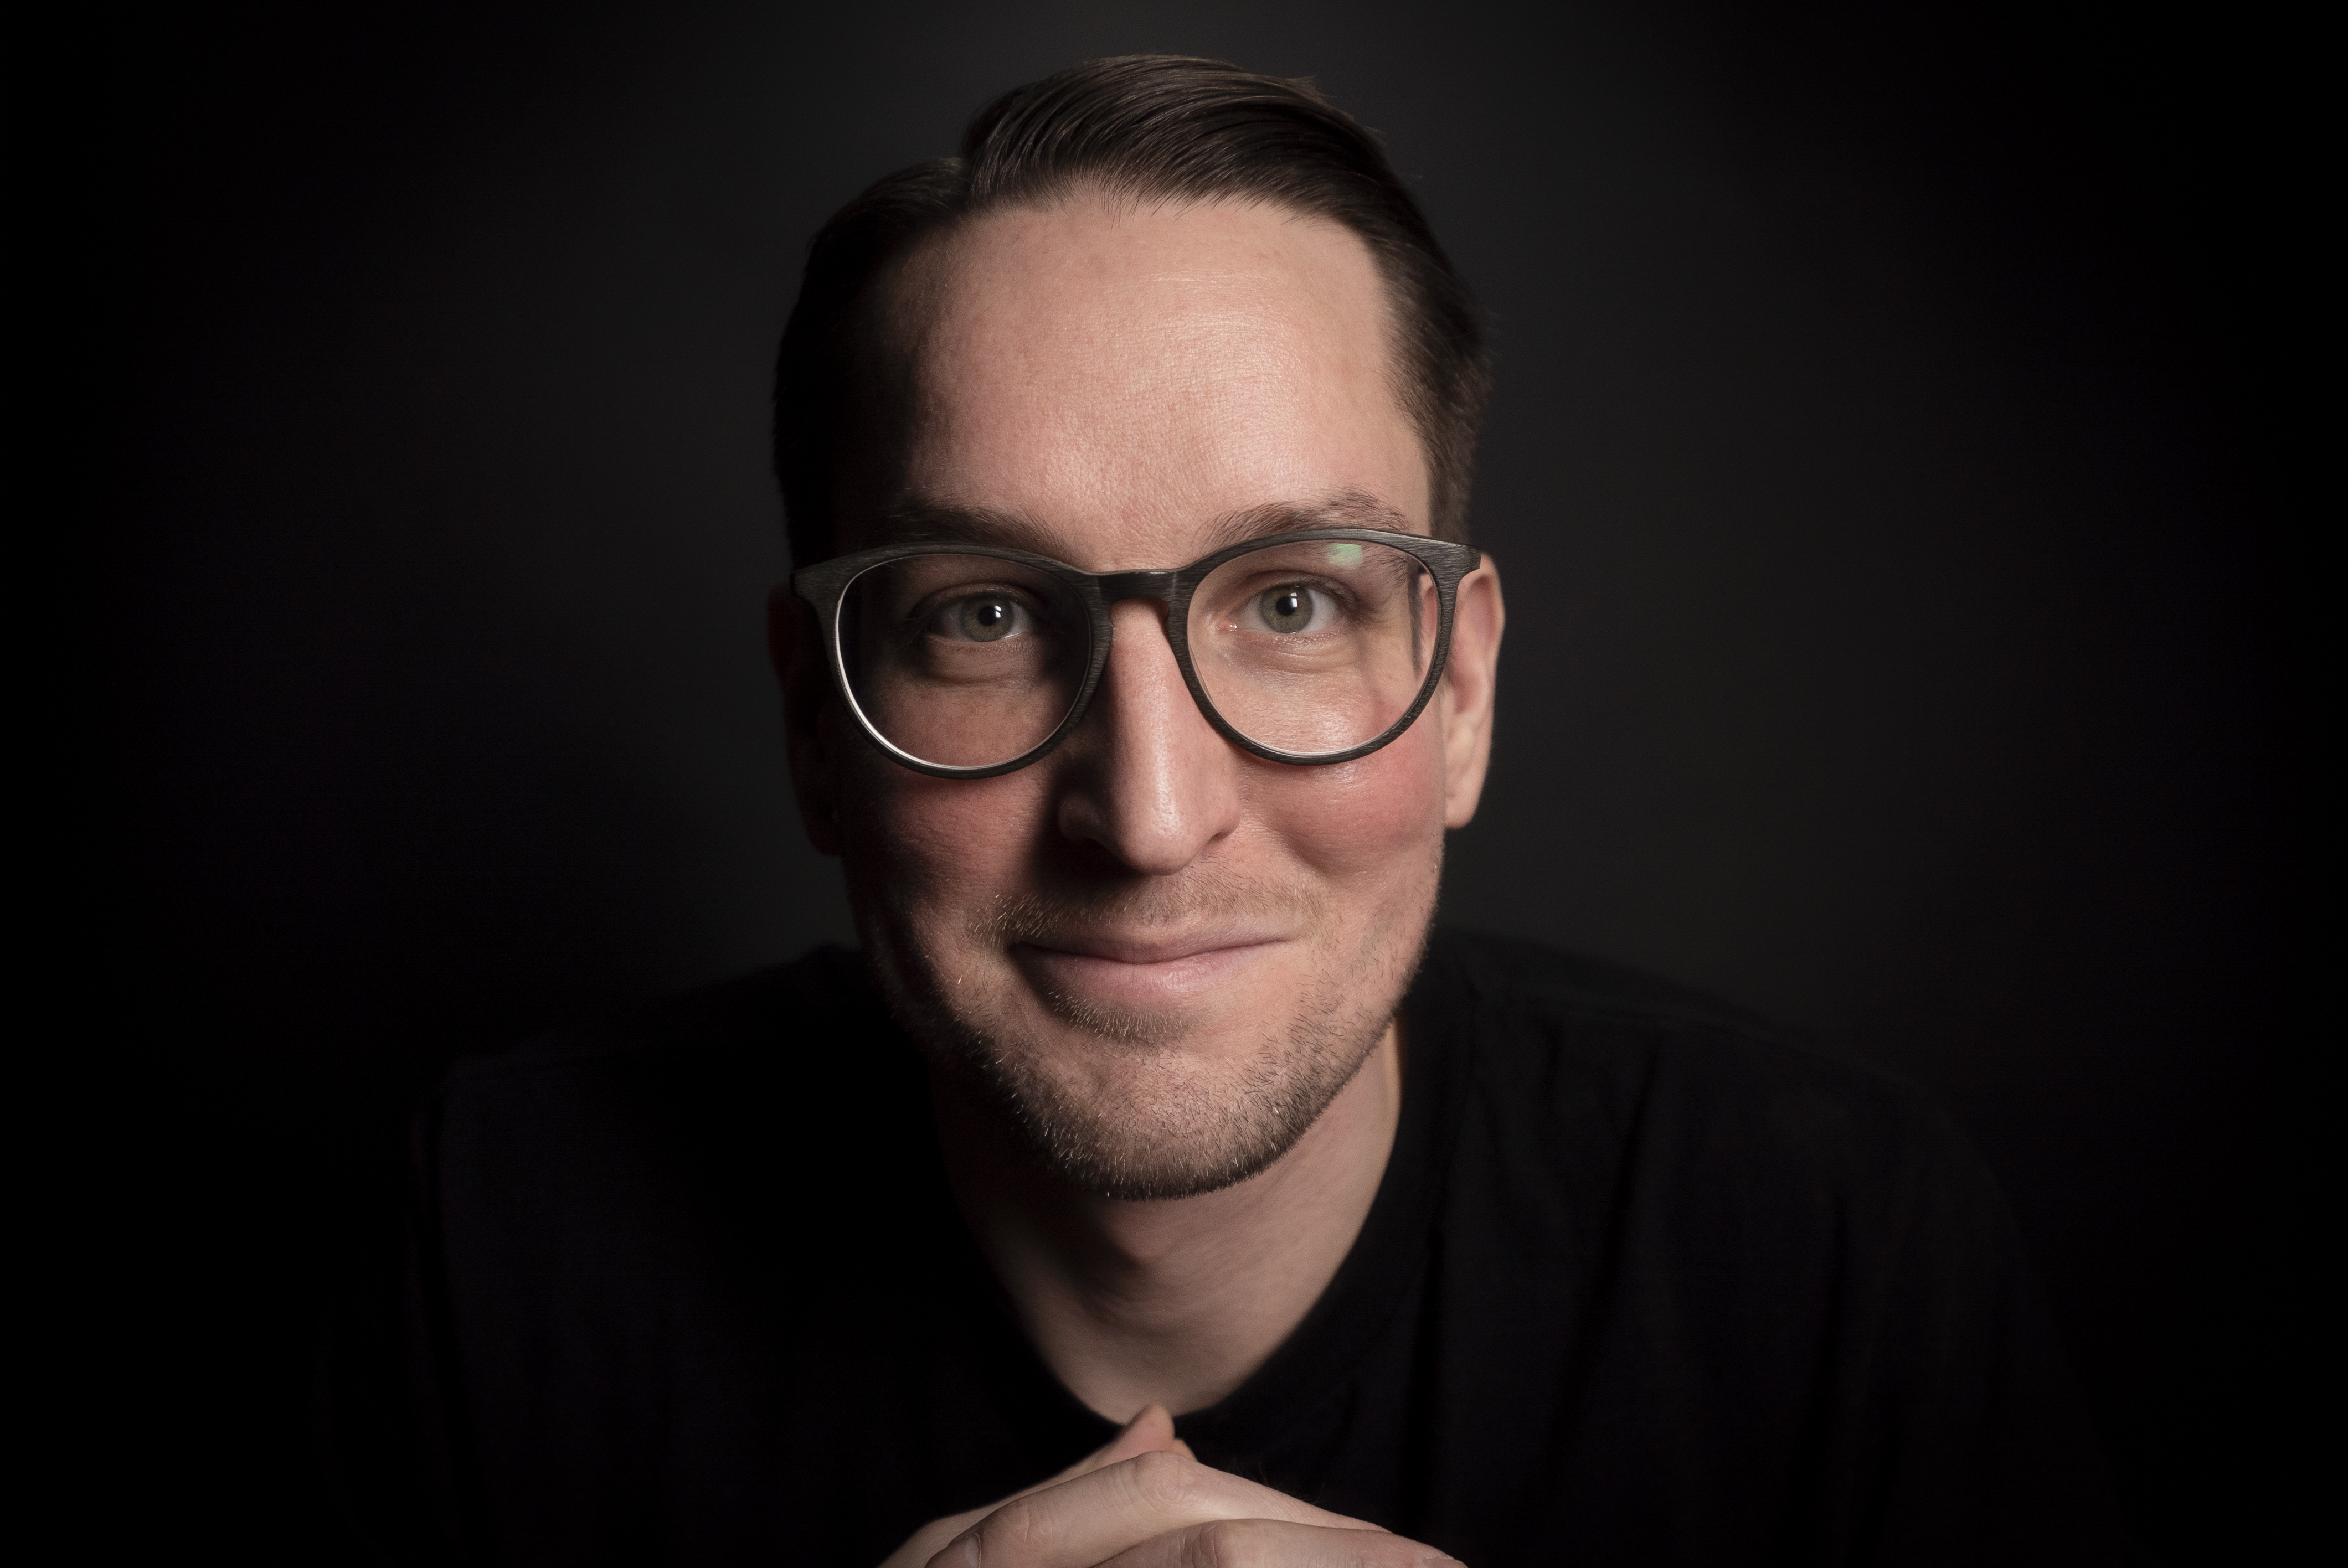 picture of a guy with glasses and black shirt